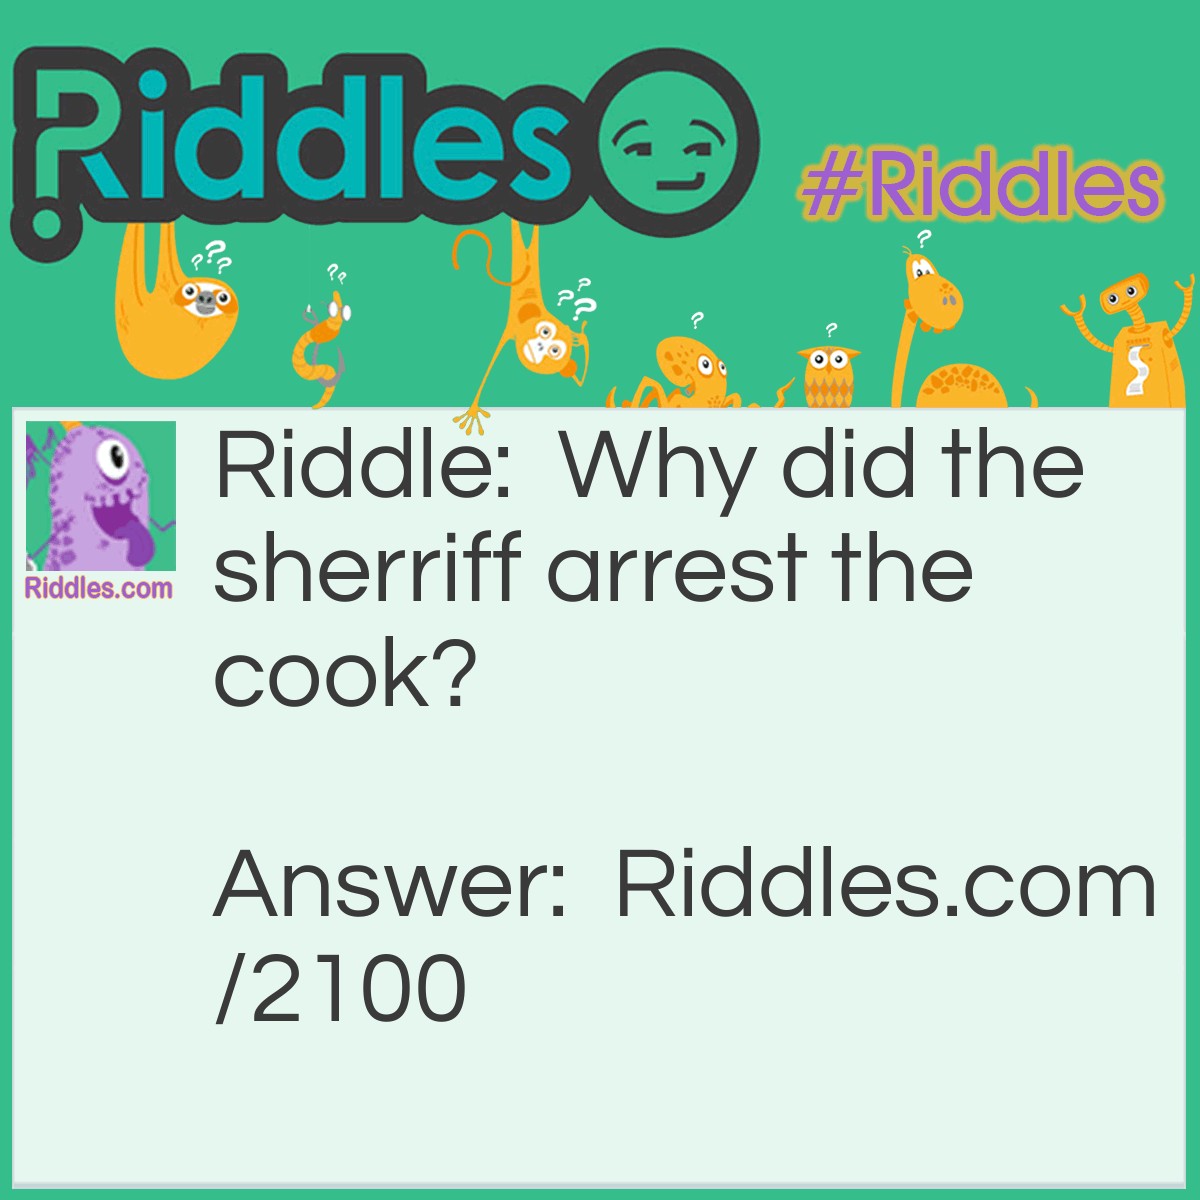 Riddle: Why did the sherriff arrest the cook? Answer: Because he was beating the eggs.